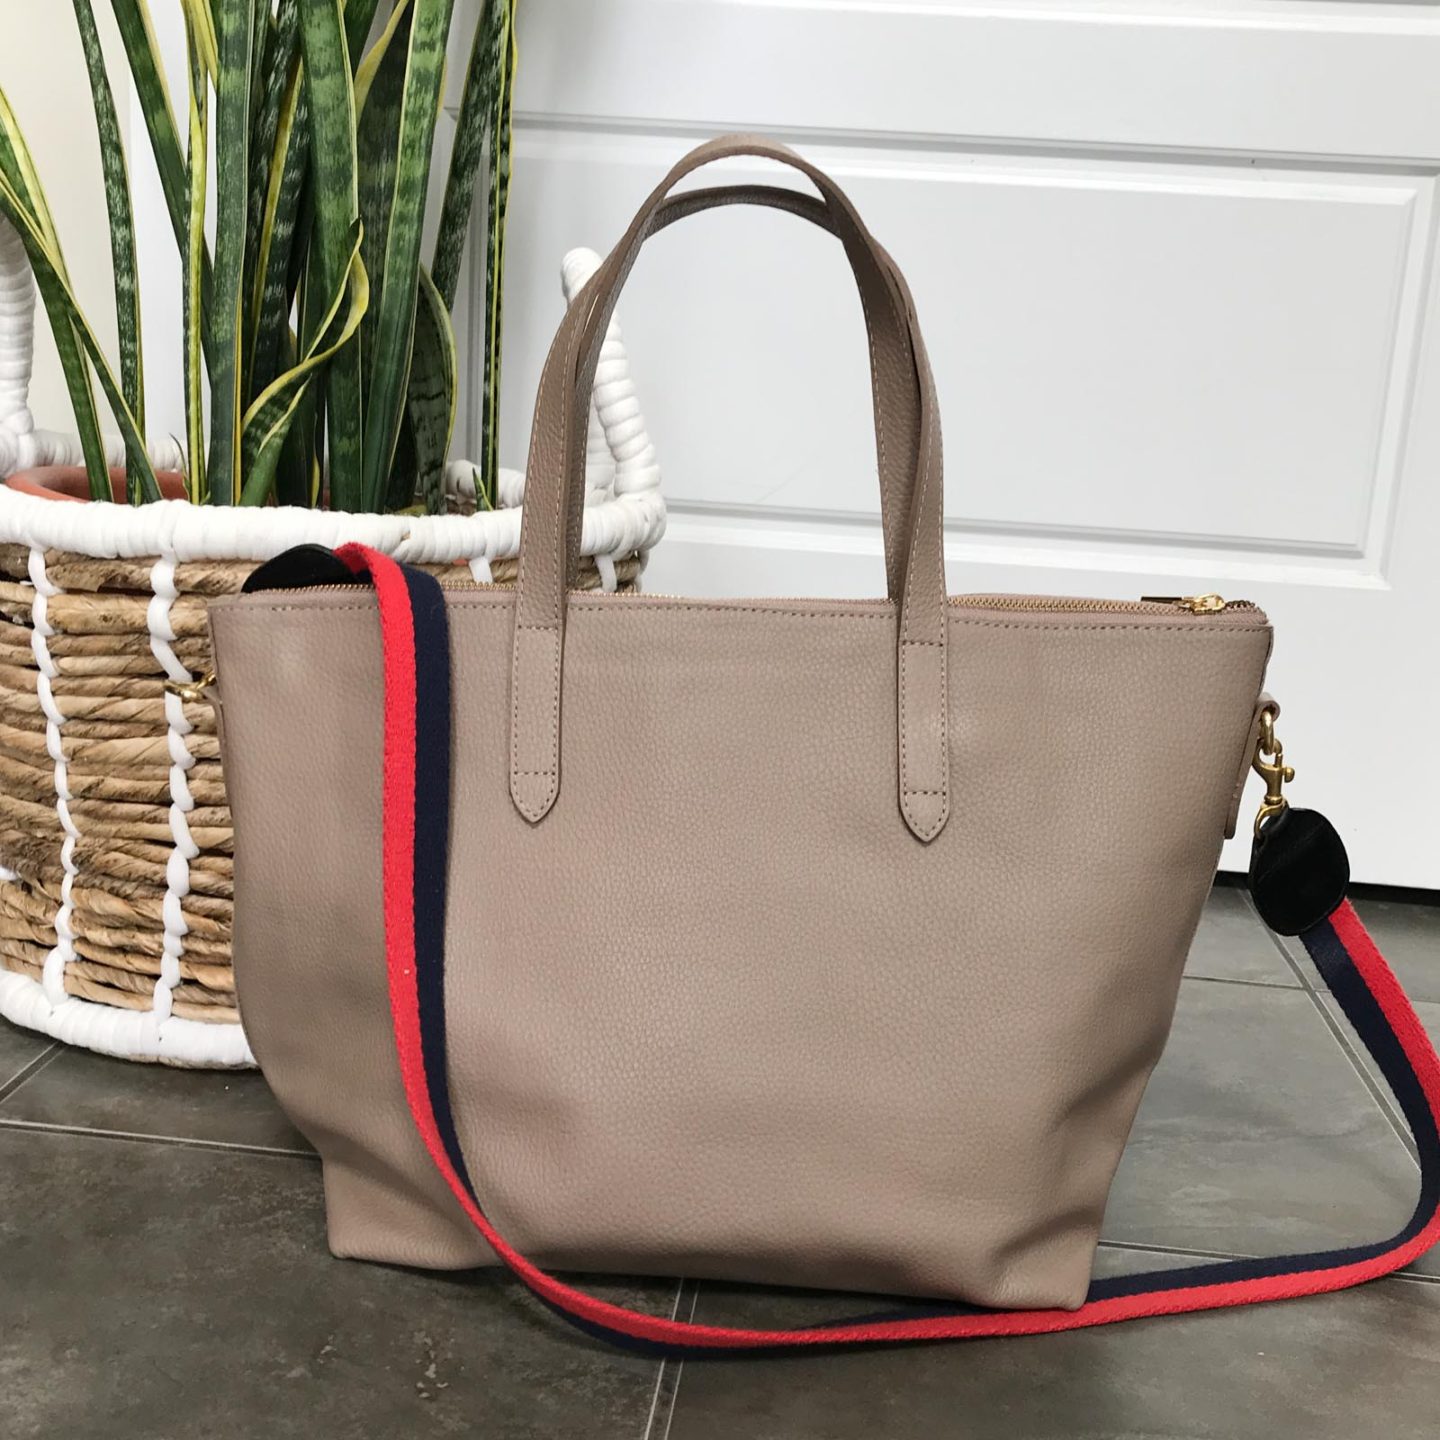 mesium carryall tote with clare v strap